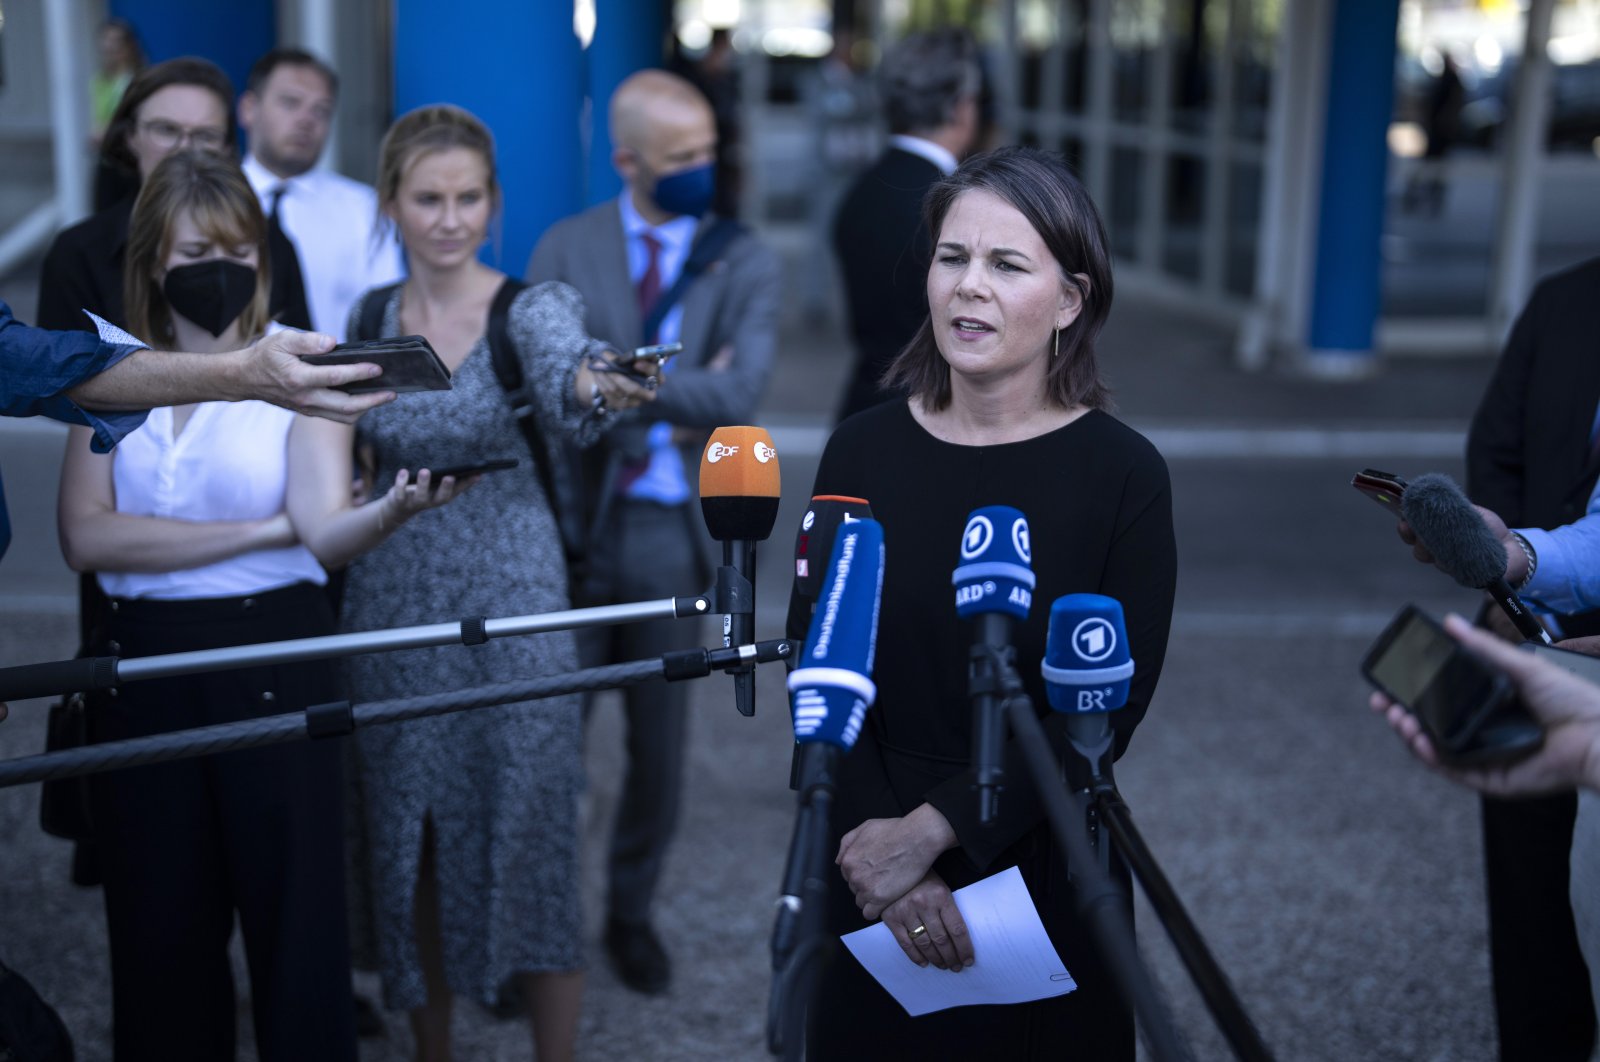 German Minister of Foreign Affairs Annalena Baerbock speaks to the press after her visit to the European border agency offices, Frontex, in the port of Piraeus, near Athens, July 28, 2022. (AP Photo)